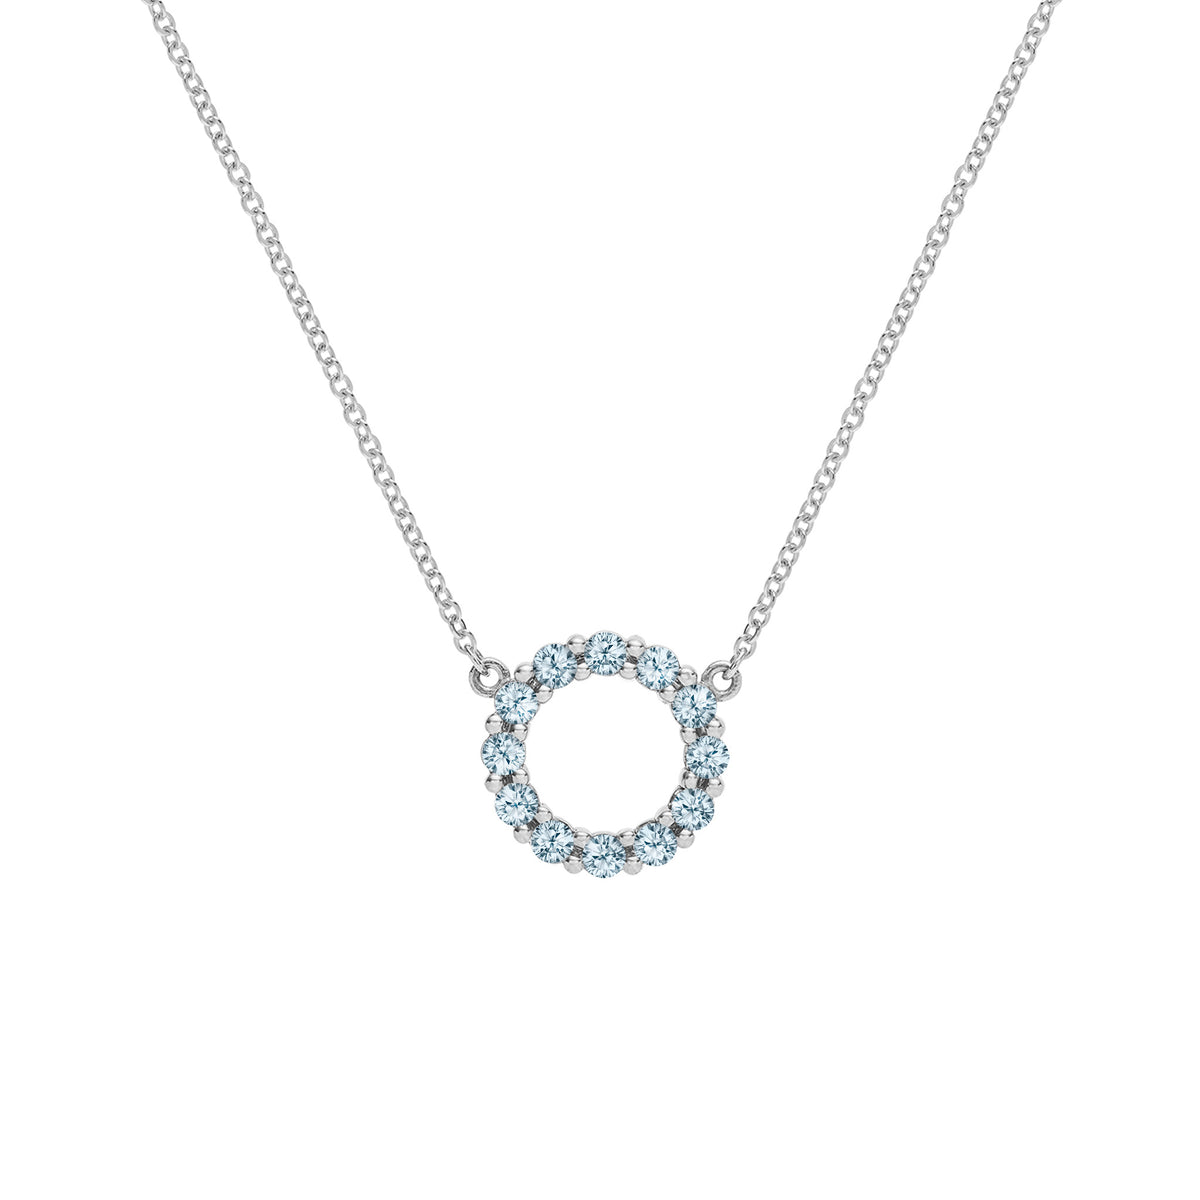 Rosecliff Circle Diamond Necklace in 14k Gold (April)